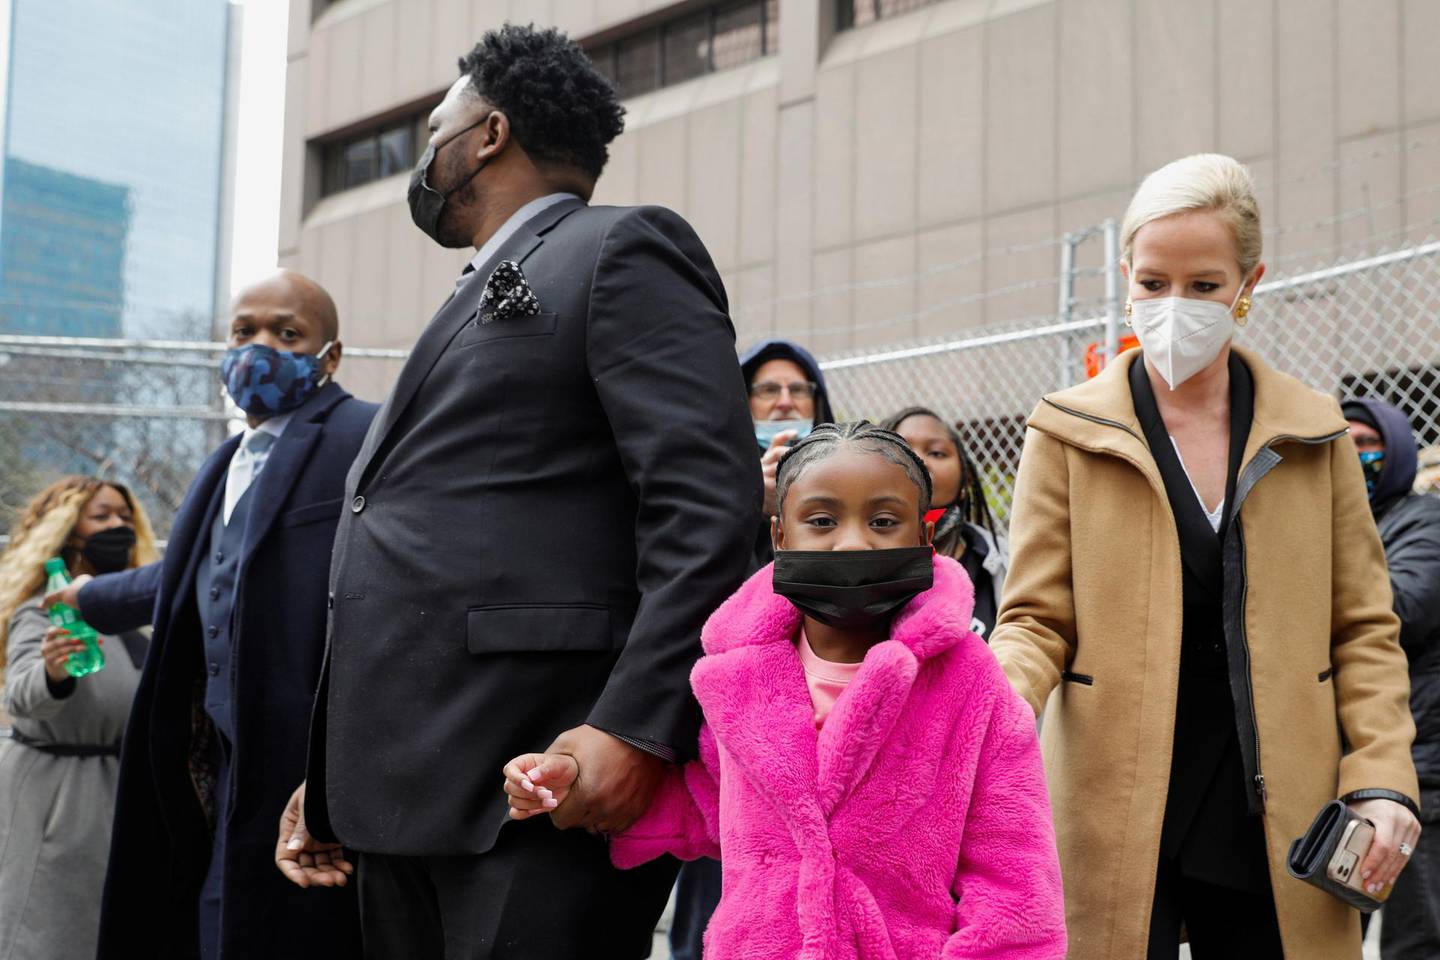 Gianna Floyd, 6, looks on outside the Hennepin County Government Center during the closing statements in the trial of former police officer Derek Chauvin, who is facing murder charges in the death of George Floyd, in Minneapolis, Minnesota, U.S., April 19, 2021. REUTERS/Nicholas Pfosi